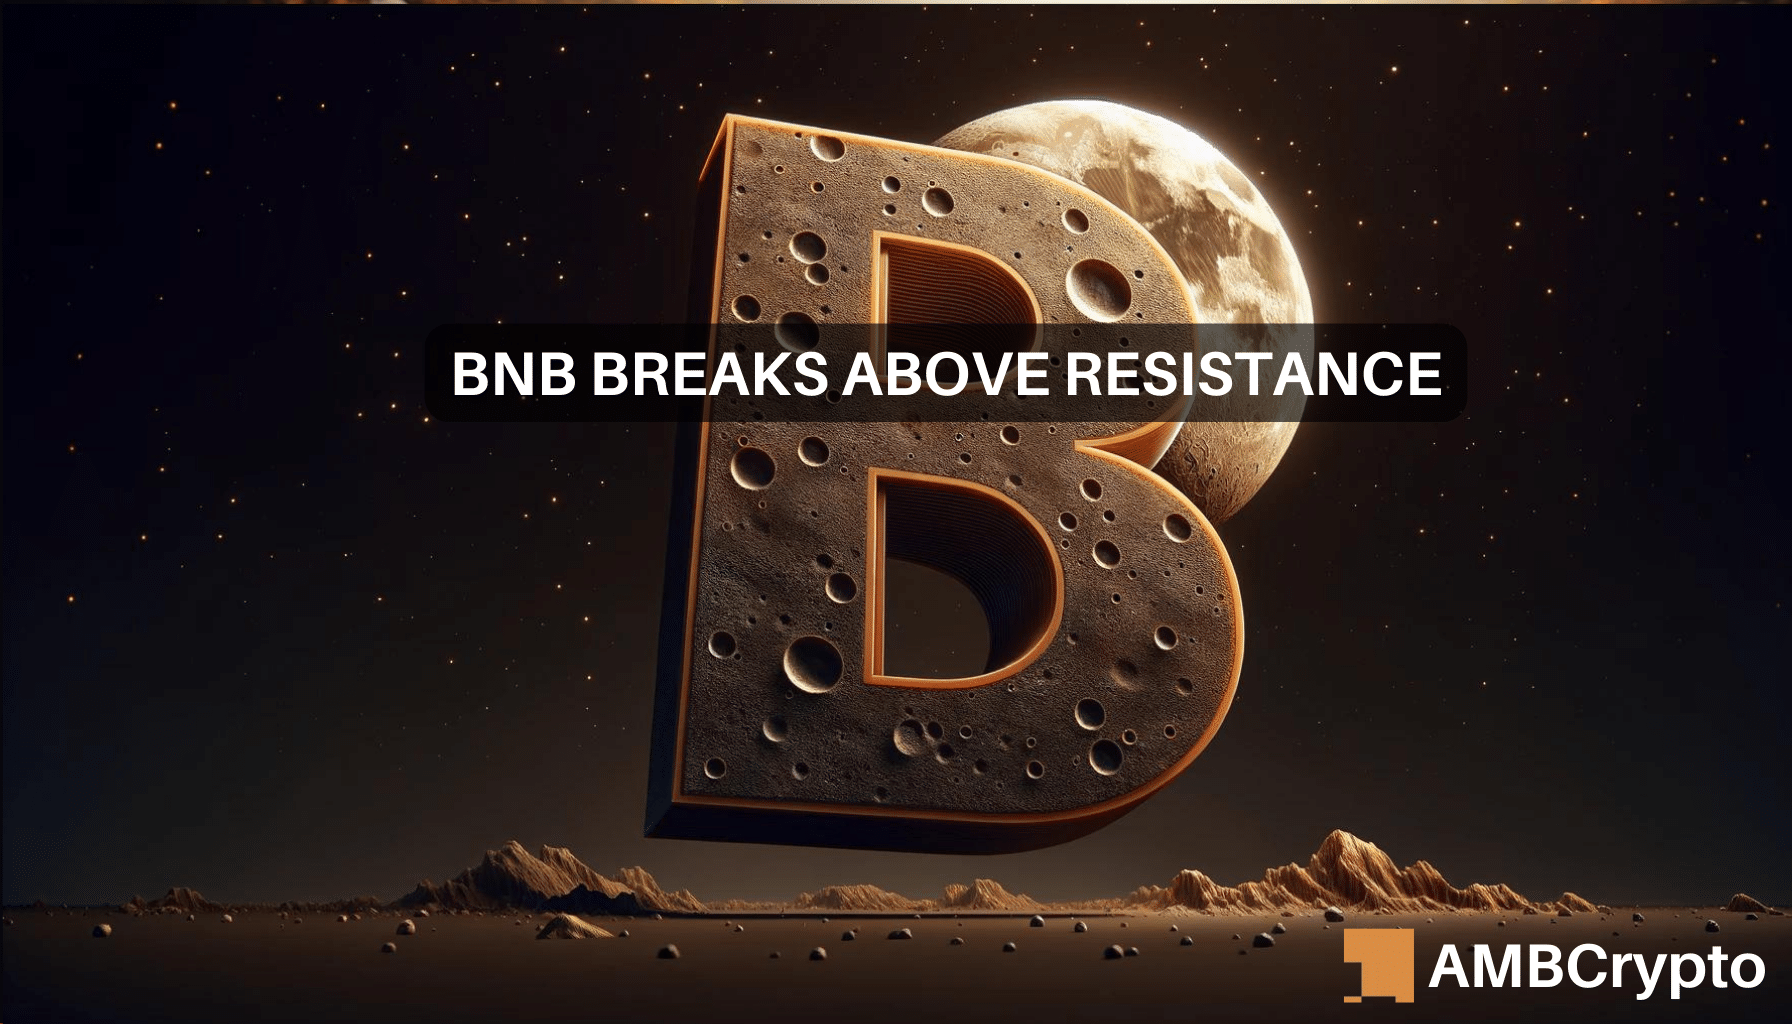 How did BNB jump past $600? Taking a look at the numbers